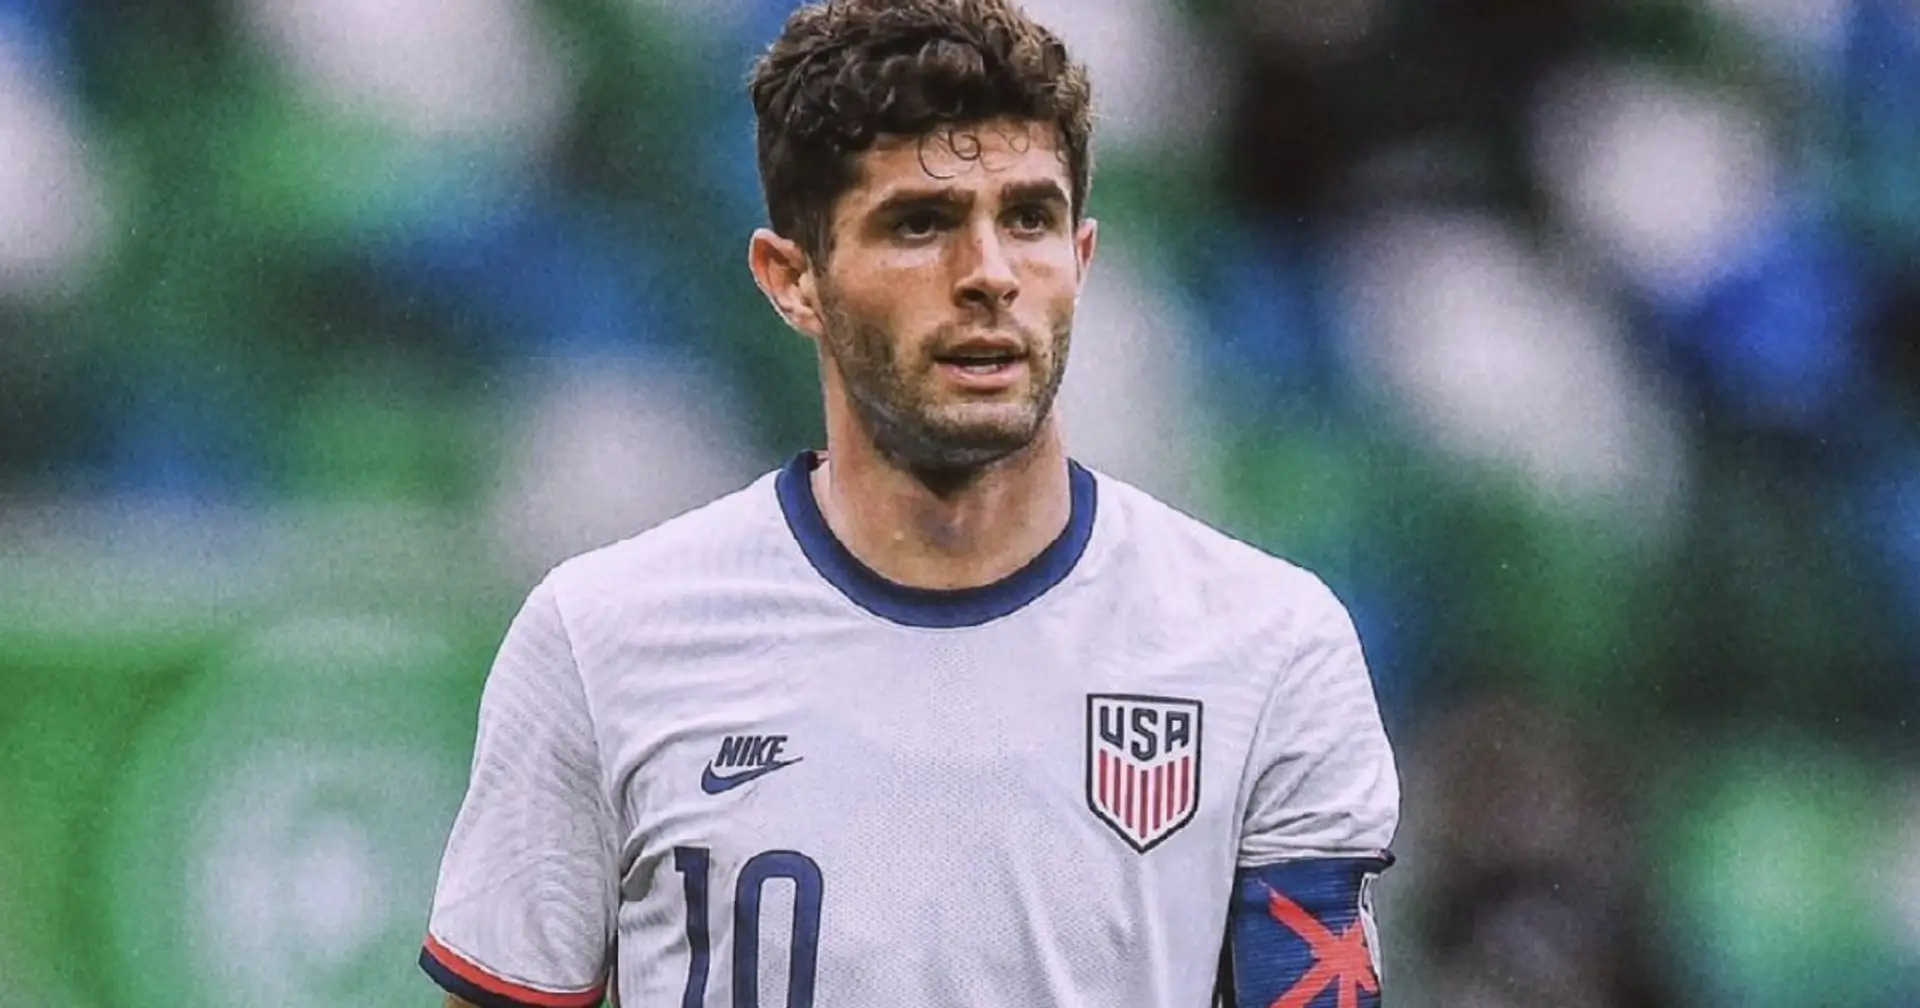 Christian Pulisic's Olympic dream lost as USA fail to qualify, will play pre-season with Chelsea